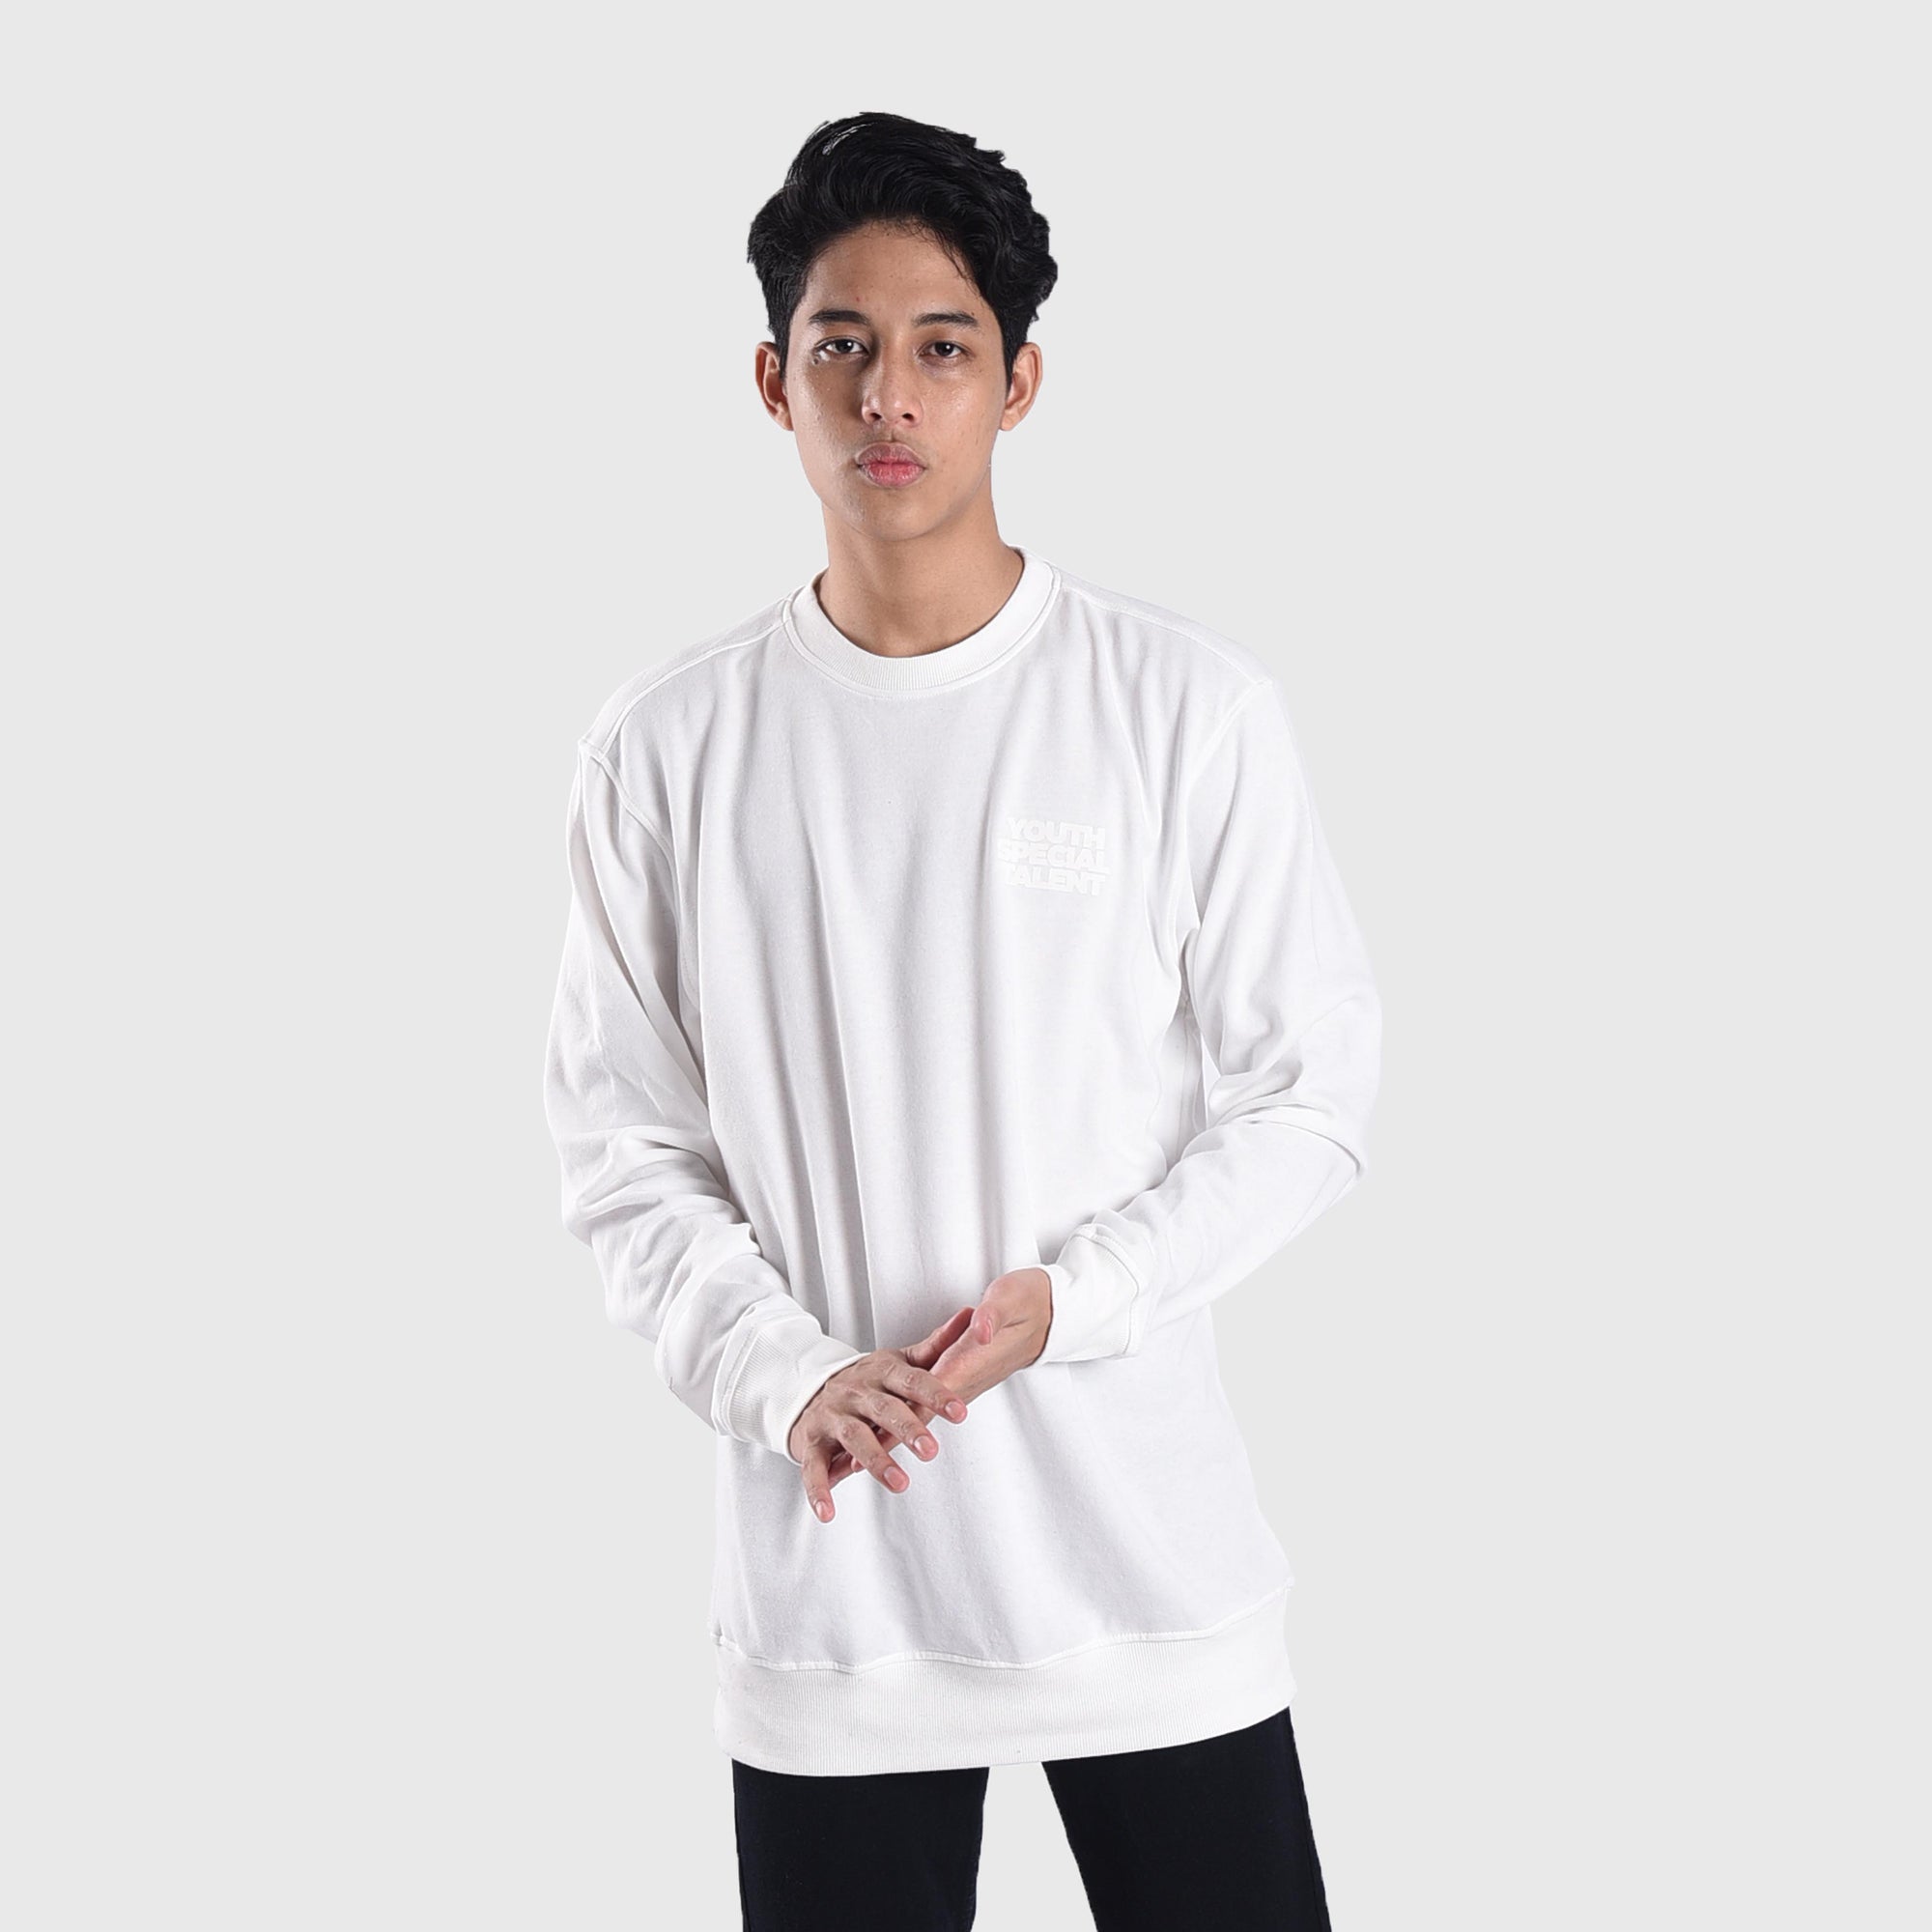 SS473 White Youth Talent Crewneck